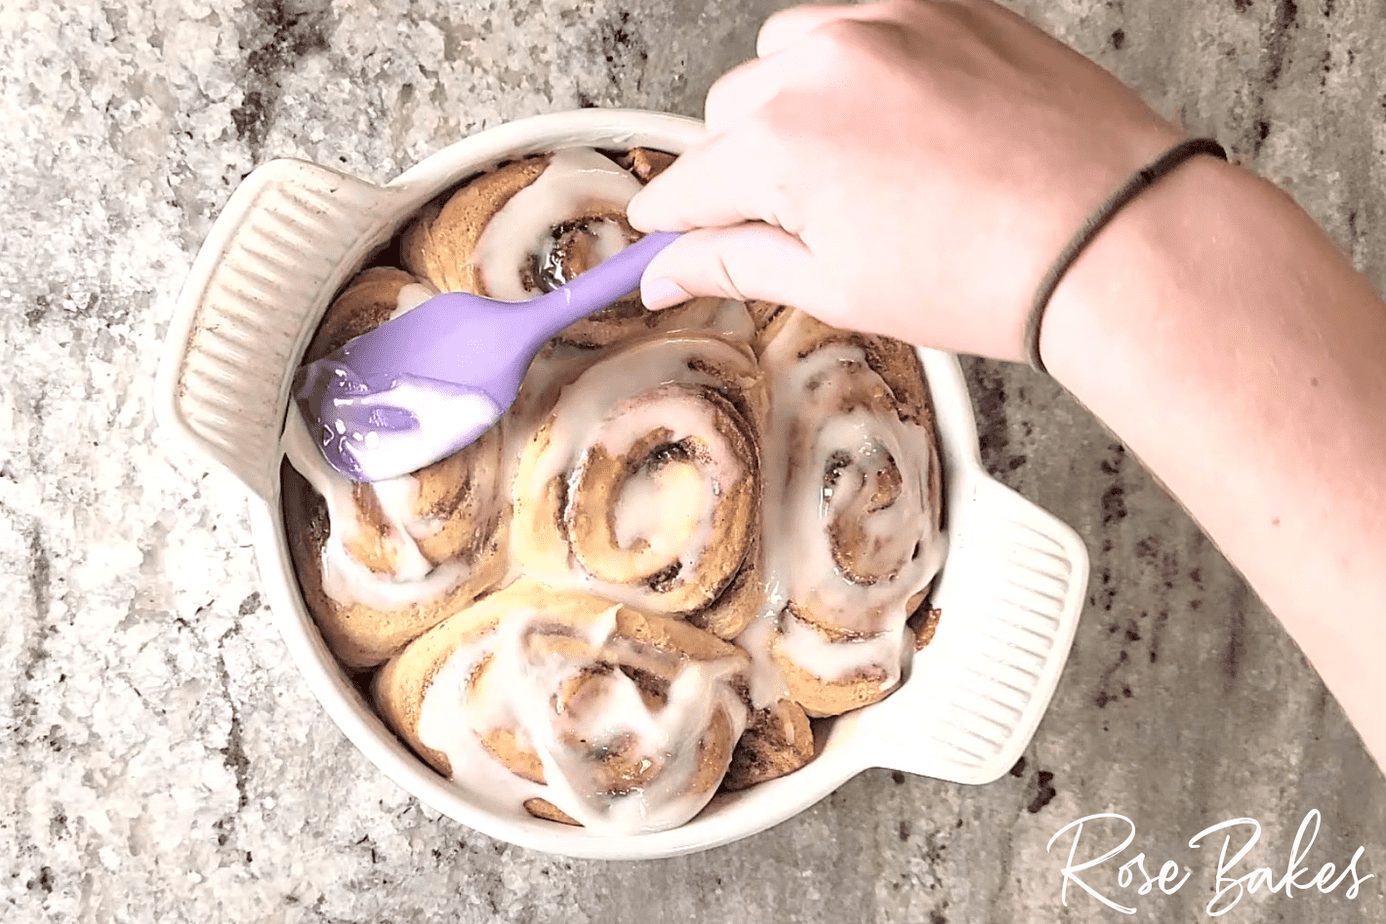 Cream Cheese Icing being spread on top of the baked cinnamon rolls with a purple spatula.